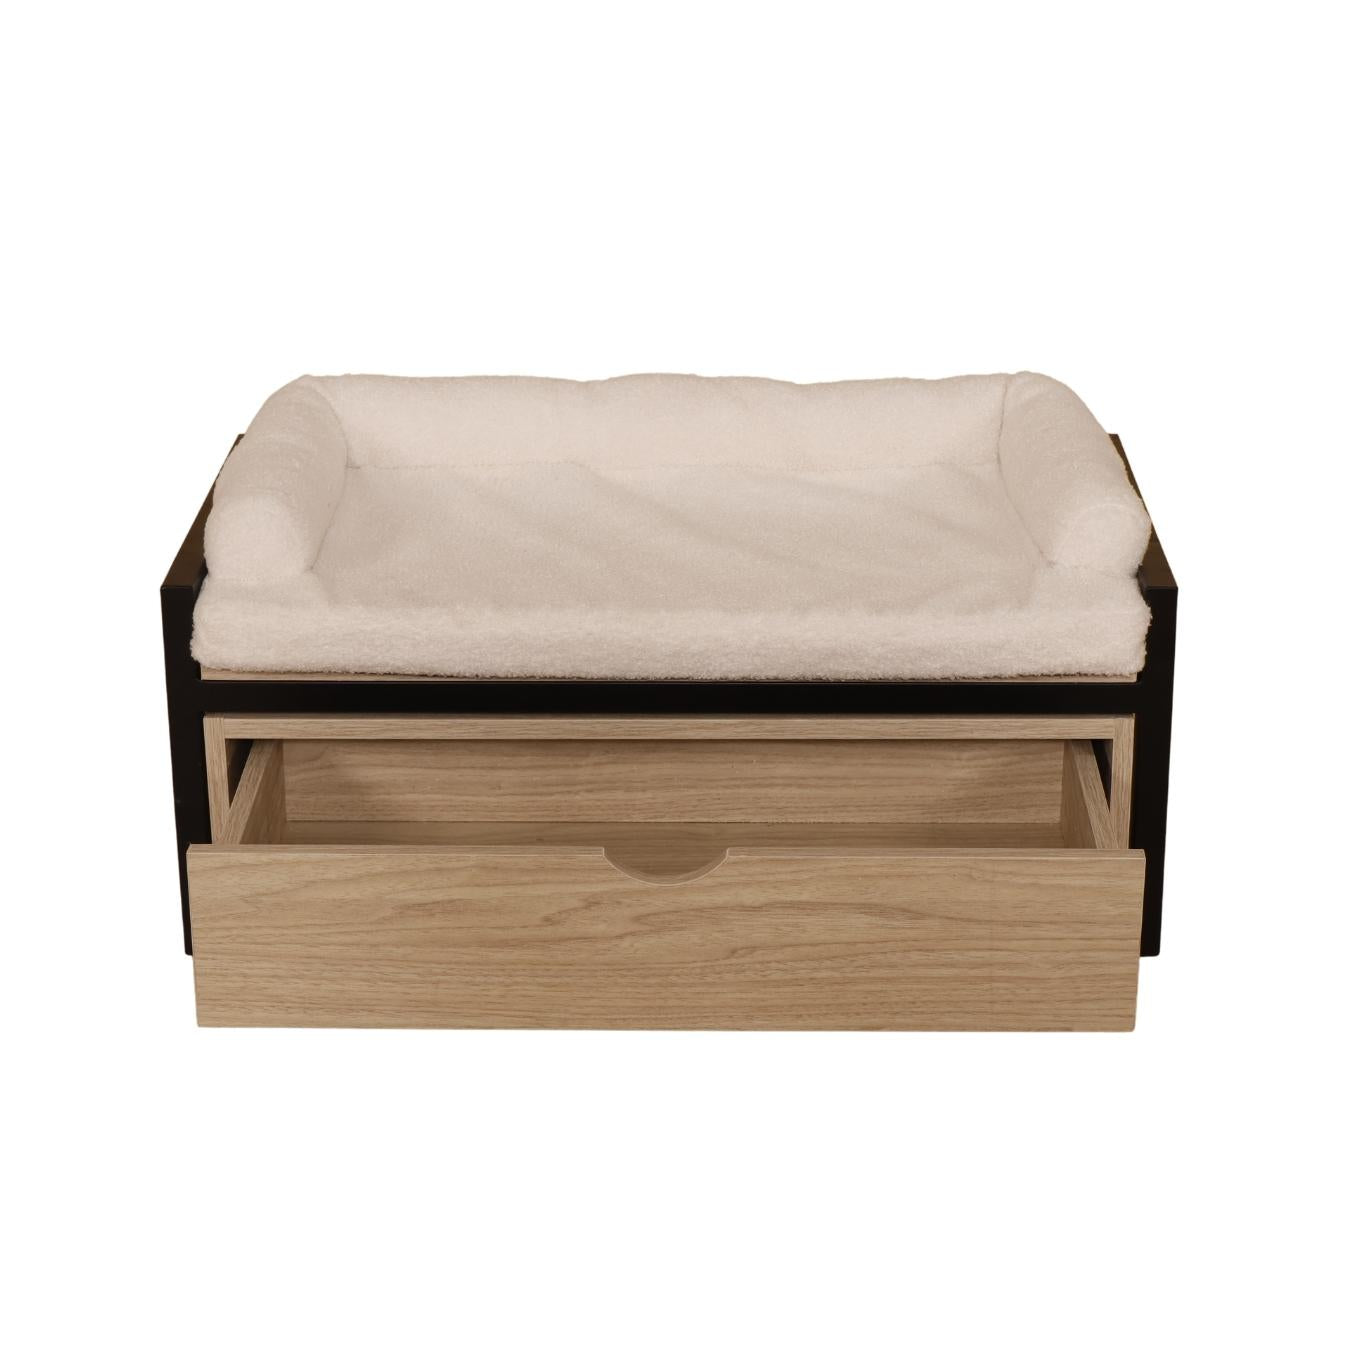 Mr. Chuck - MARC Elevated Pet Bed with Storage Mr. Chuck Pet Store